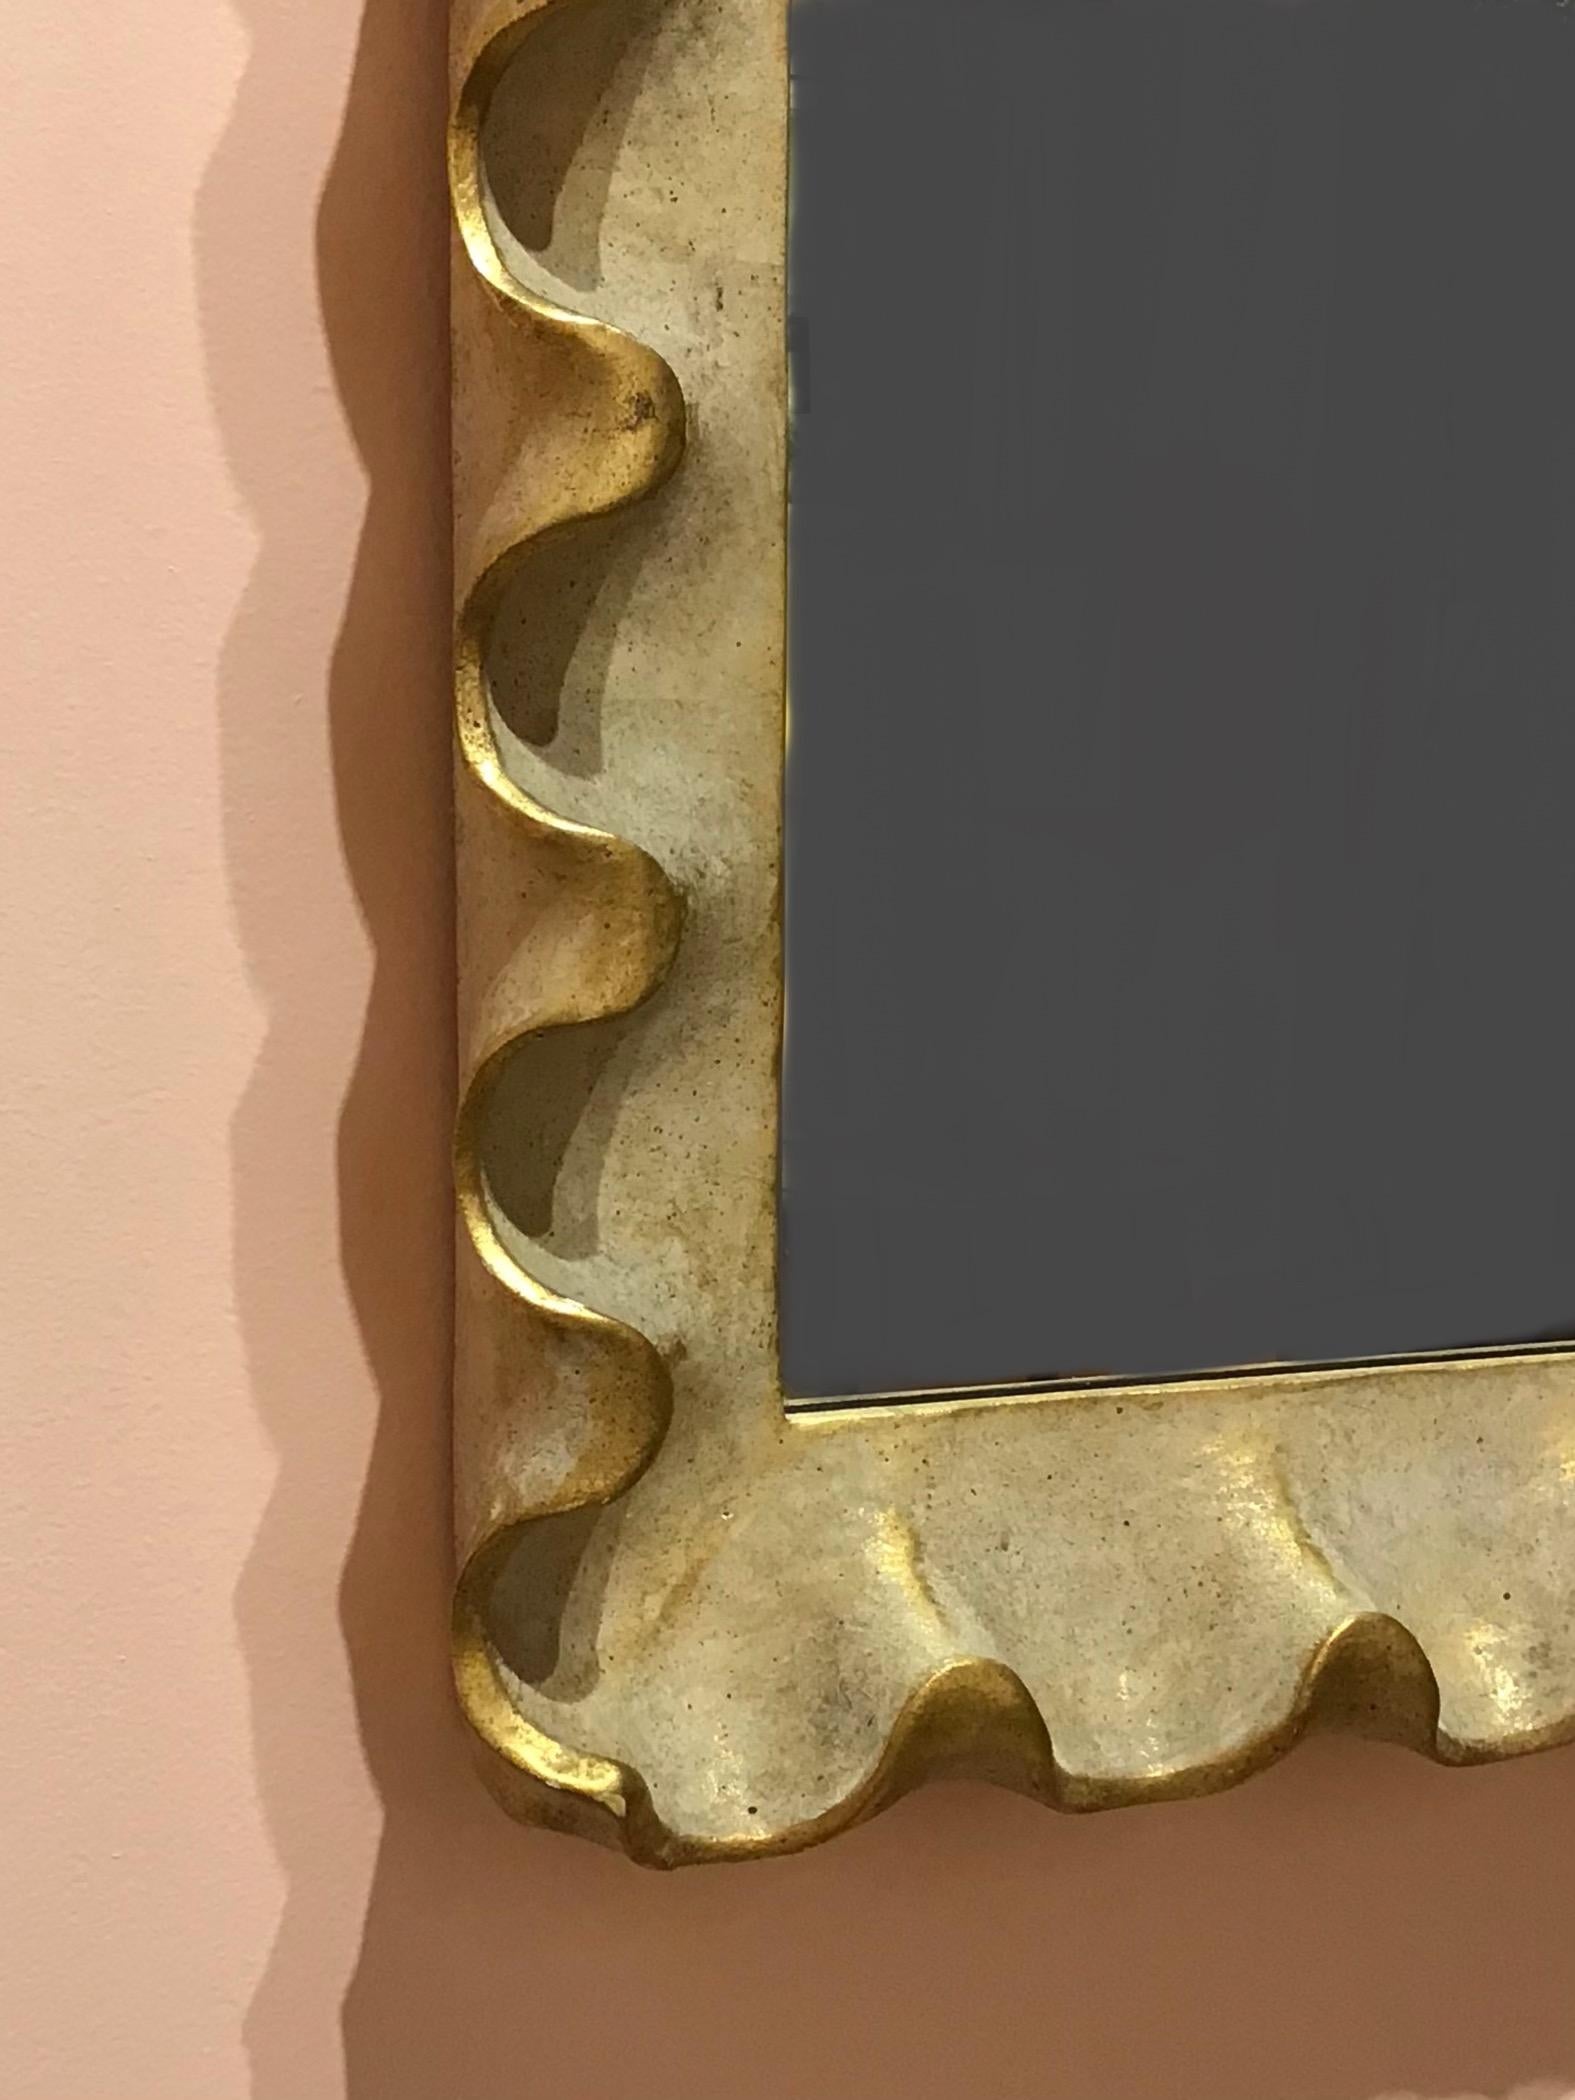 Large scalloped mirror in the manner of Serge Roche. Gilt gesso over carved wood with a pale pink soda wash finish said to have been popularized by Wildenstein Galleries in the 1950s.